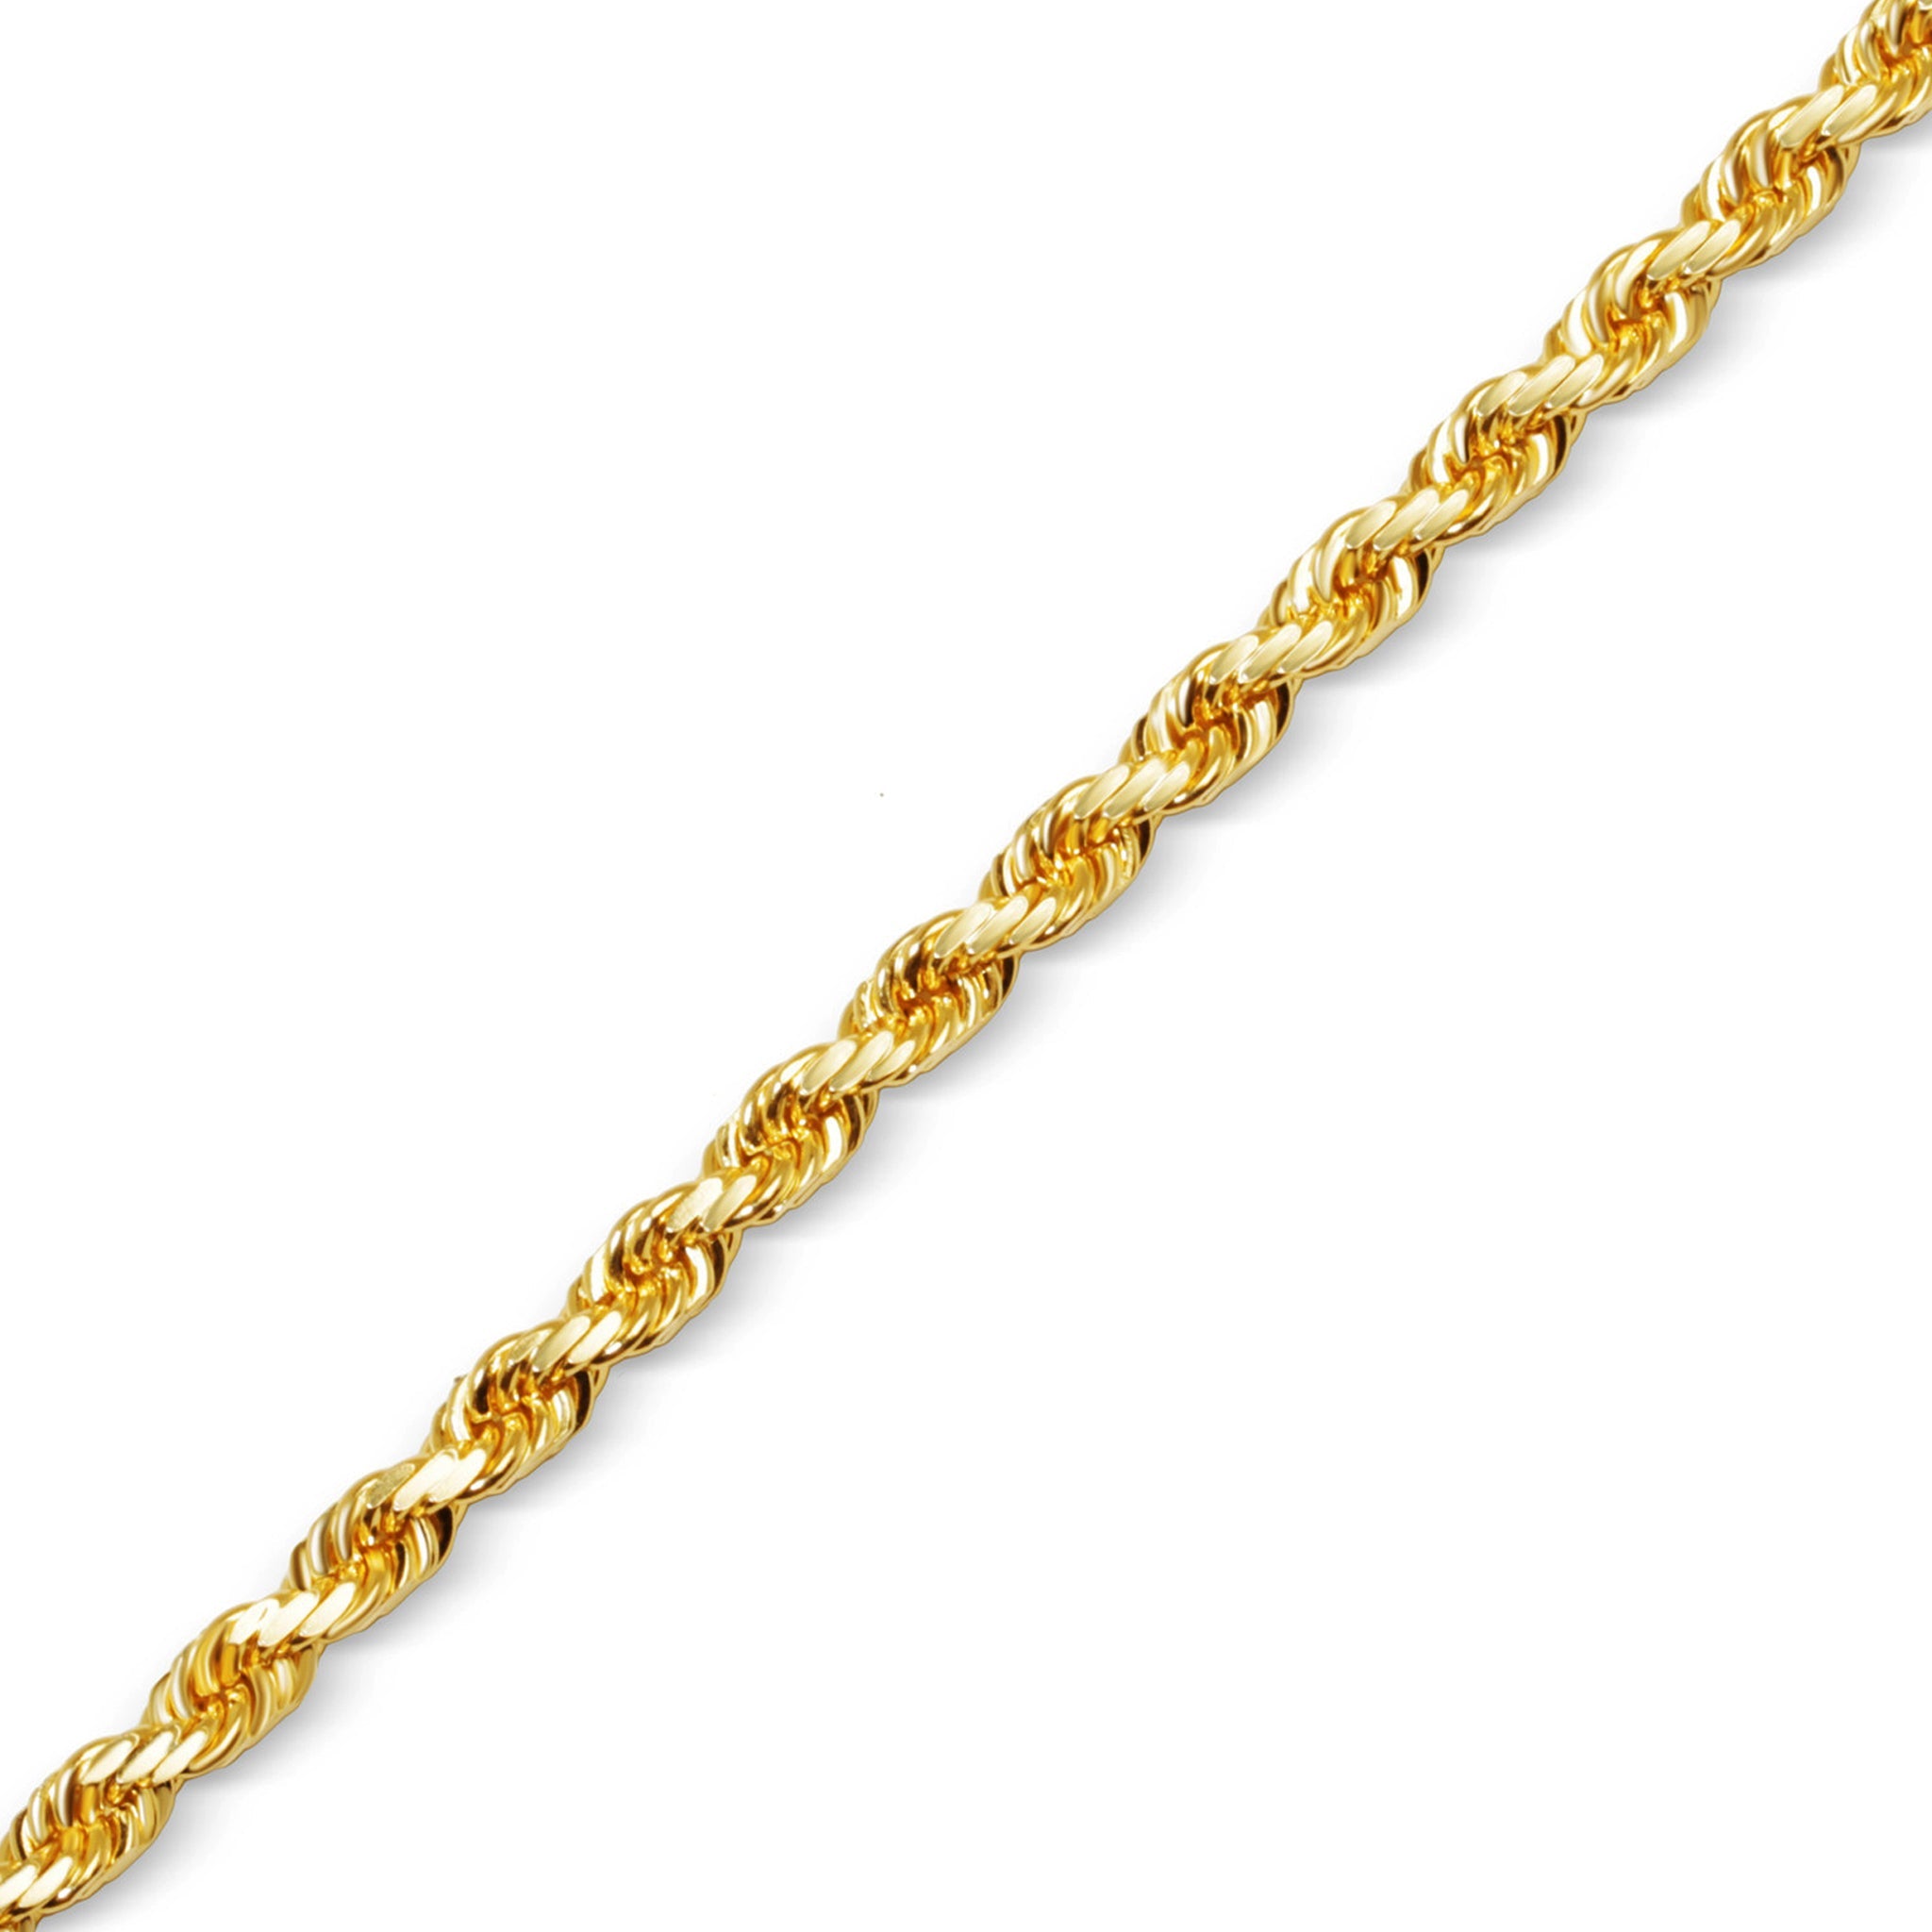 Thick Gold Chain Ring / Handmade Chain Ring 14K White Gold / 7 3/4 US/CA